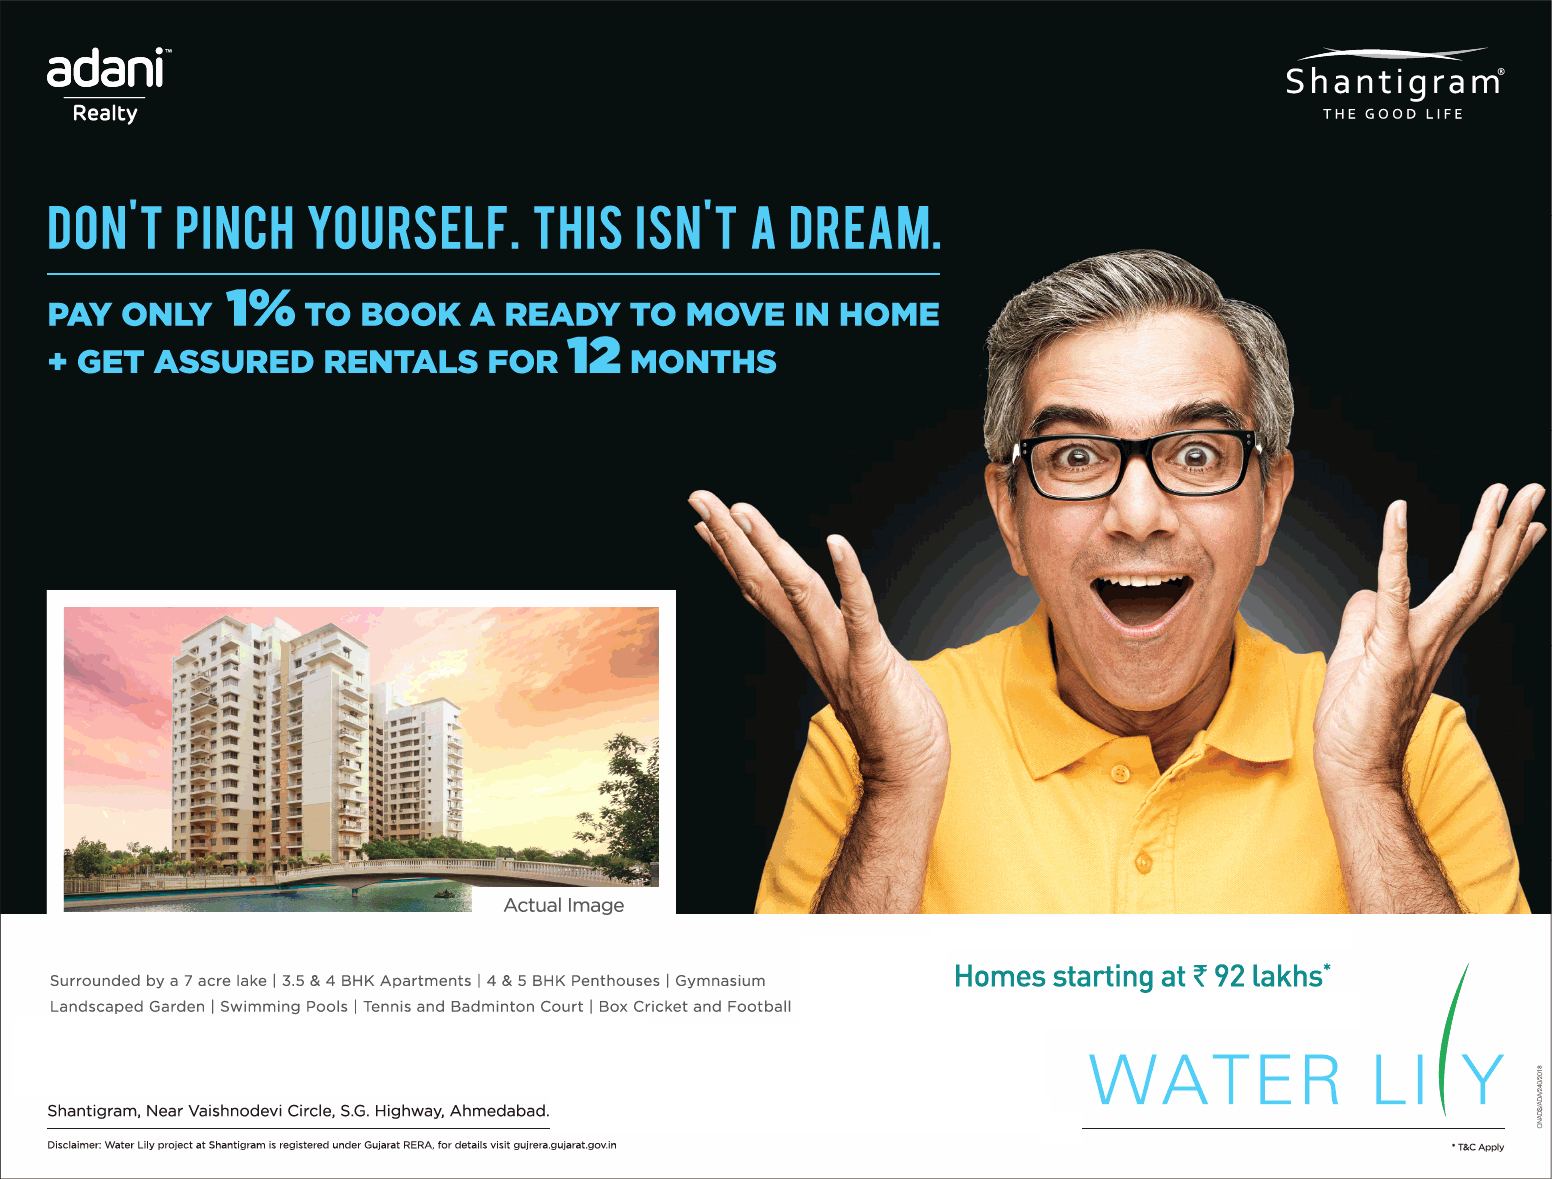 Pay only 1% to book ready to move in home at Adani Shantigram Water Lily in Ahmedabad Update